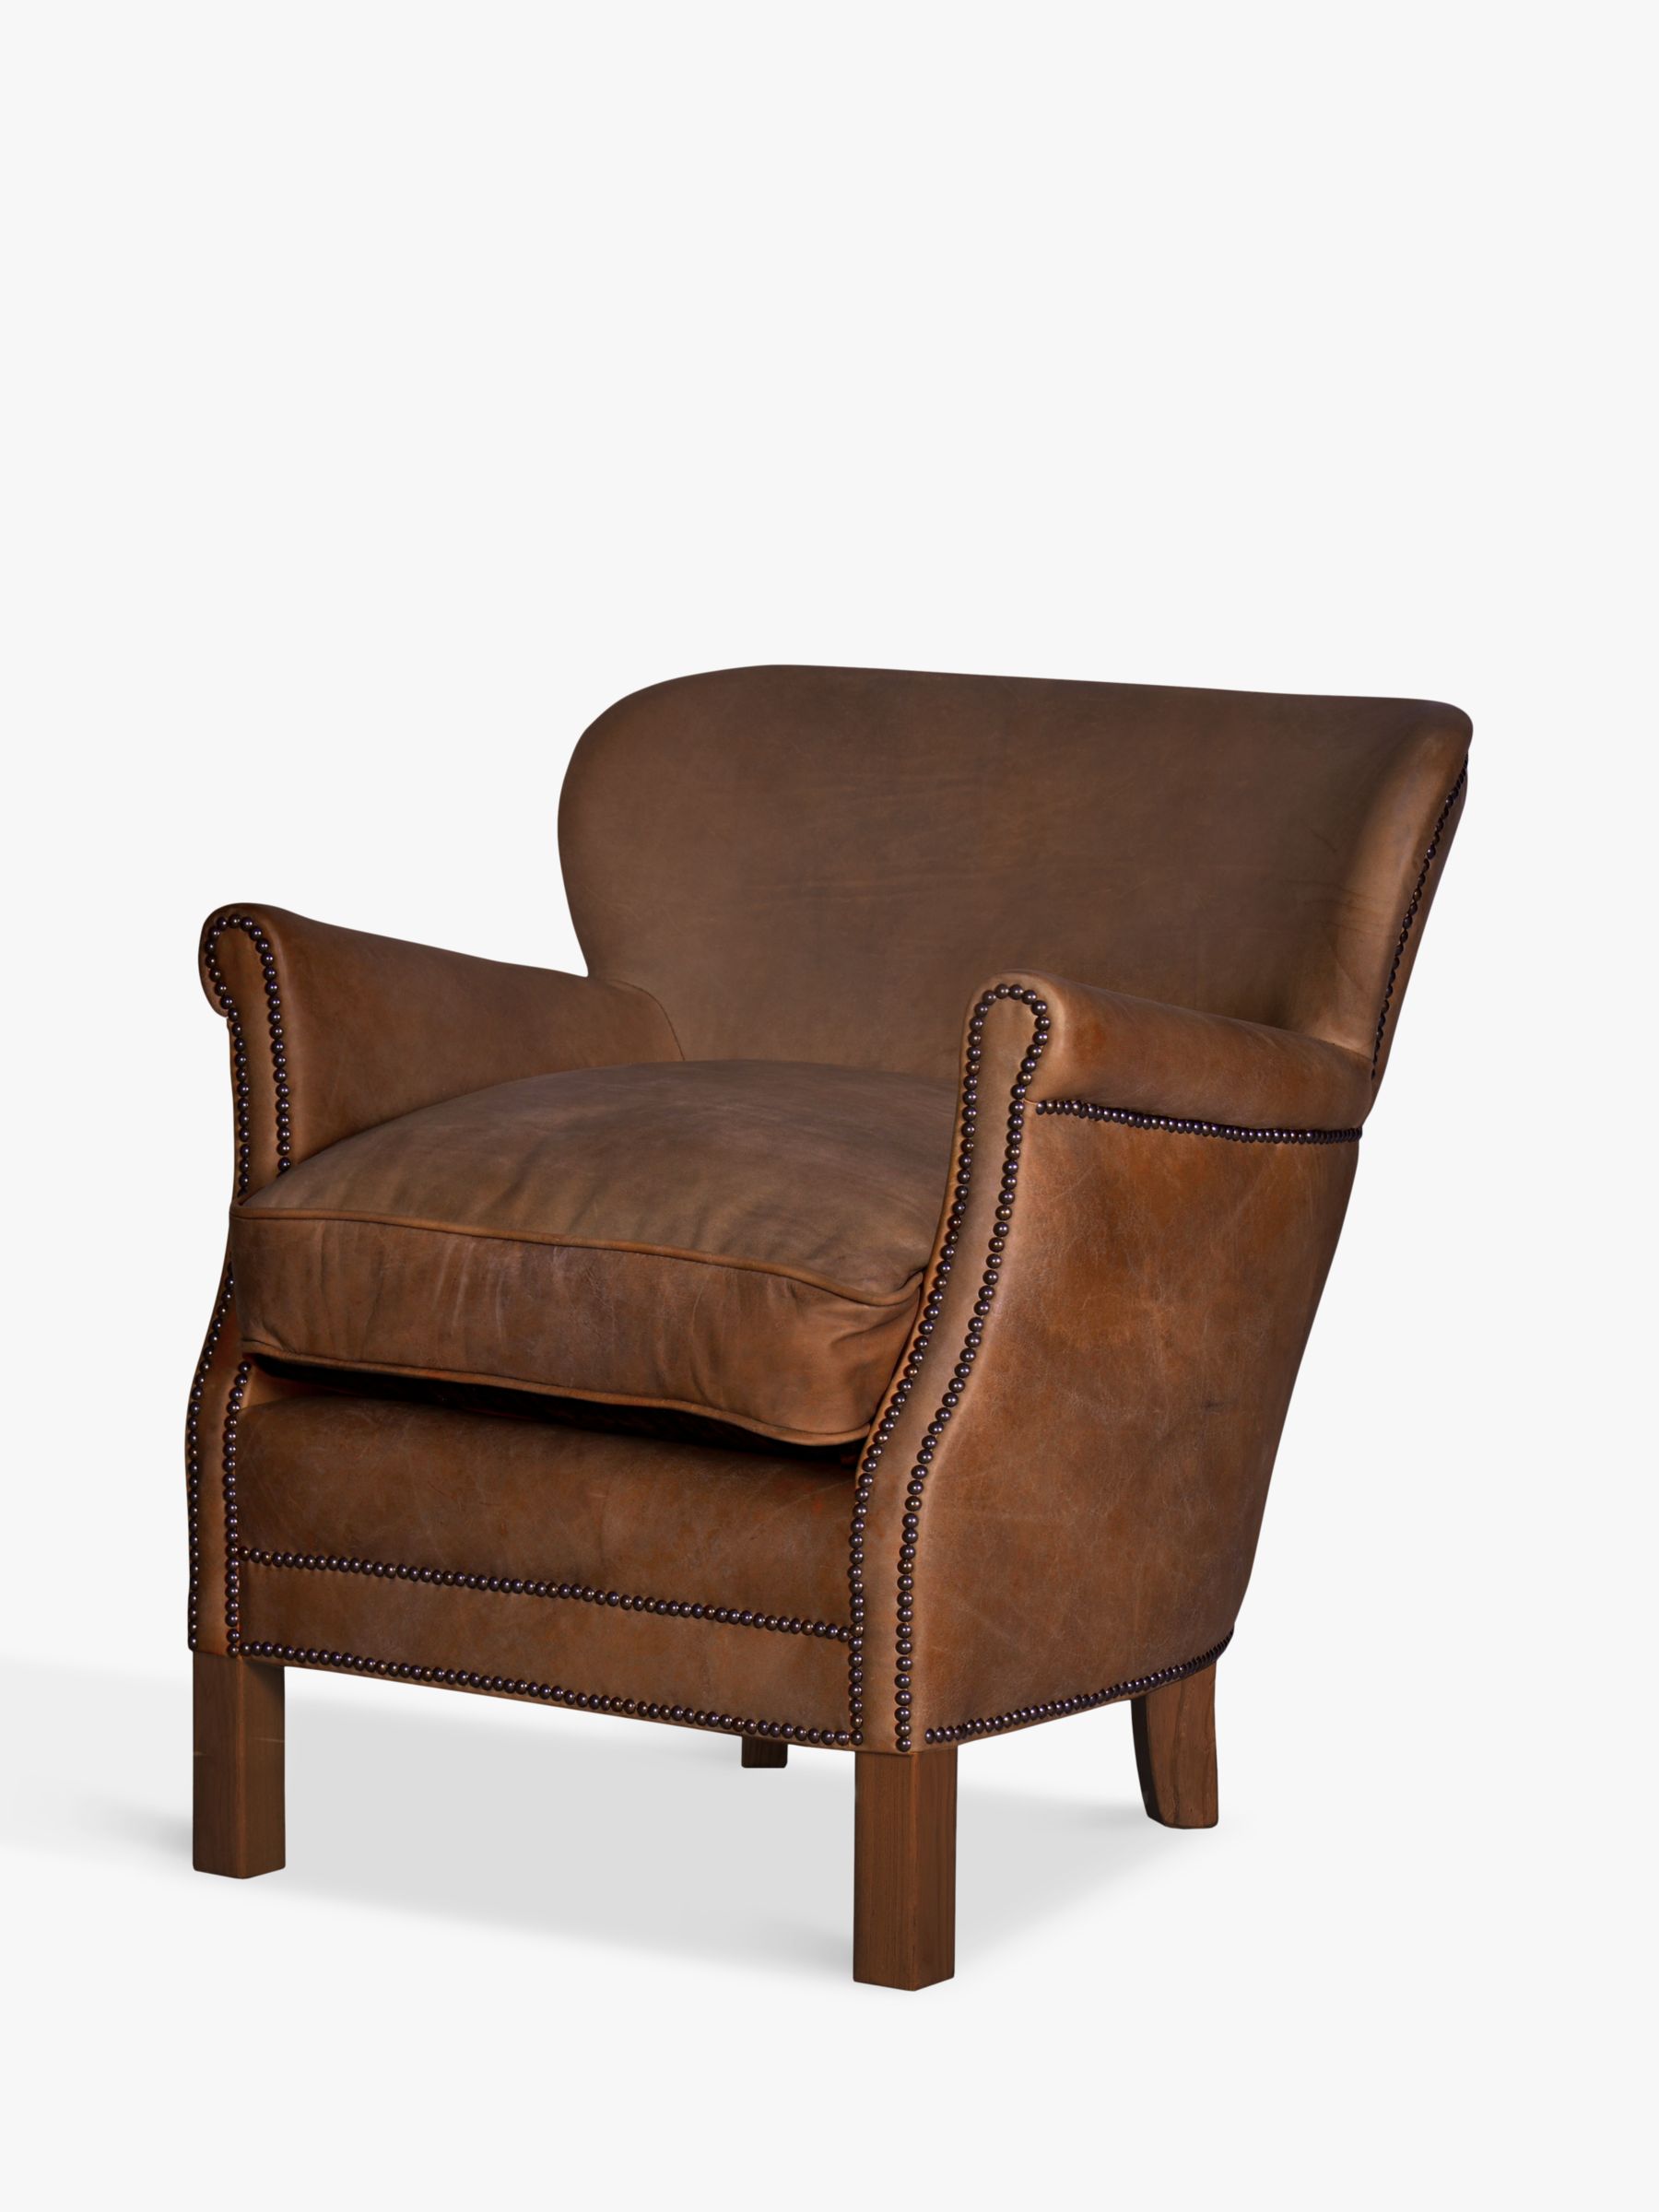 Halo Little Professor Leather Armchair Antique Whisky At John